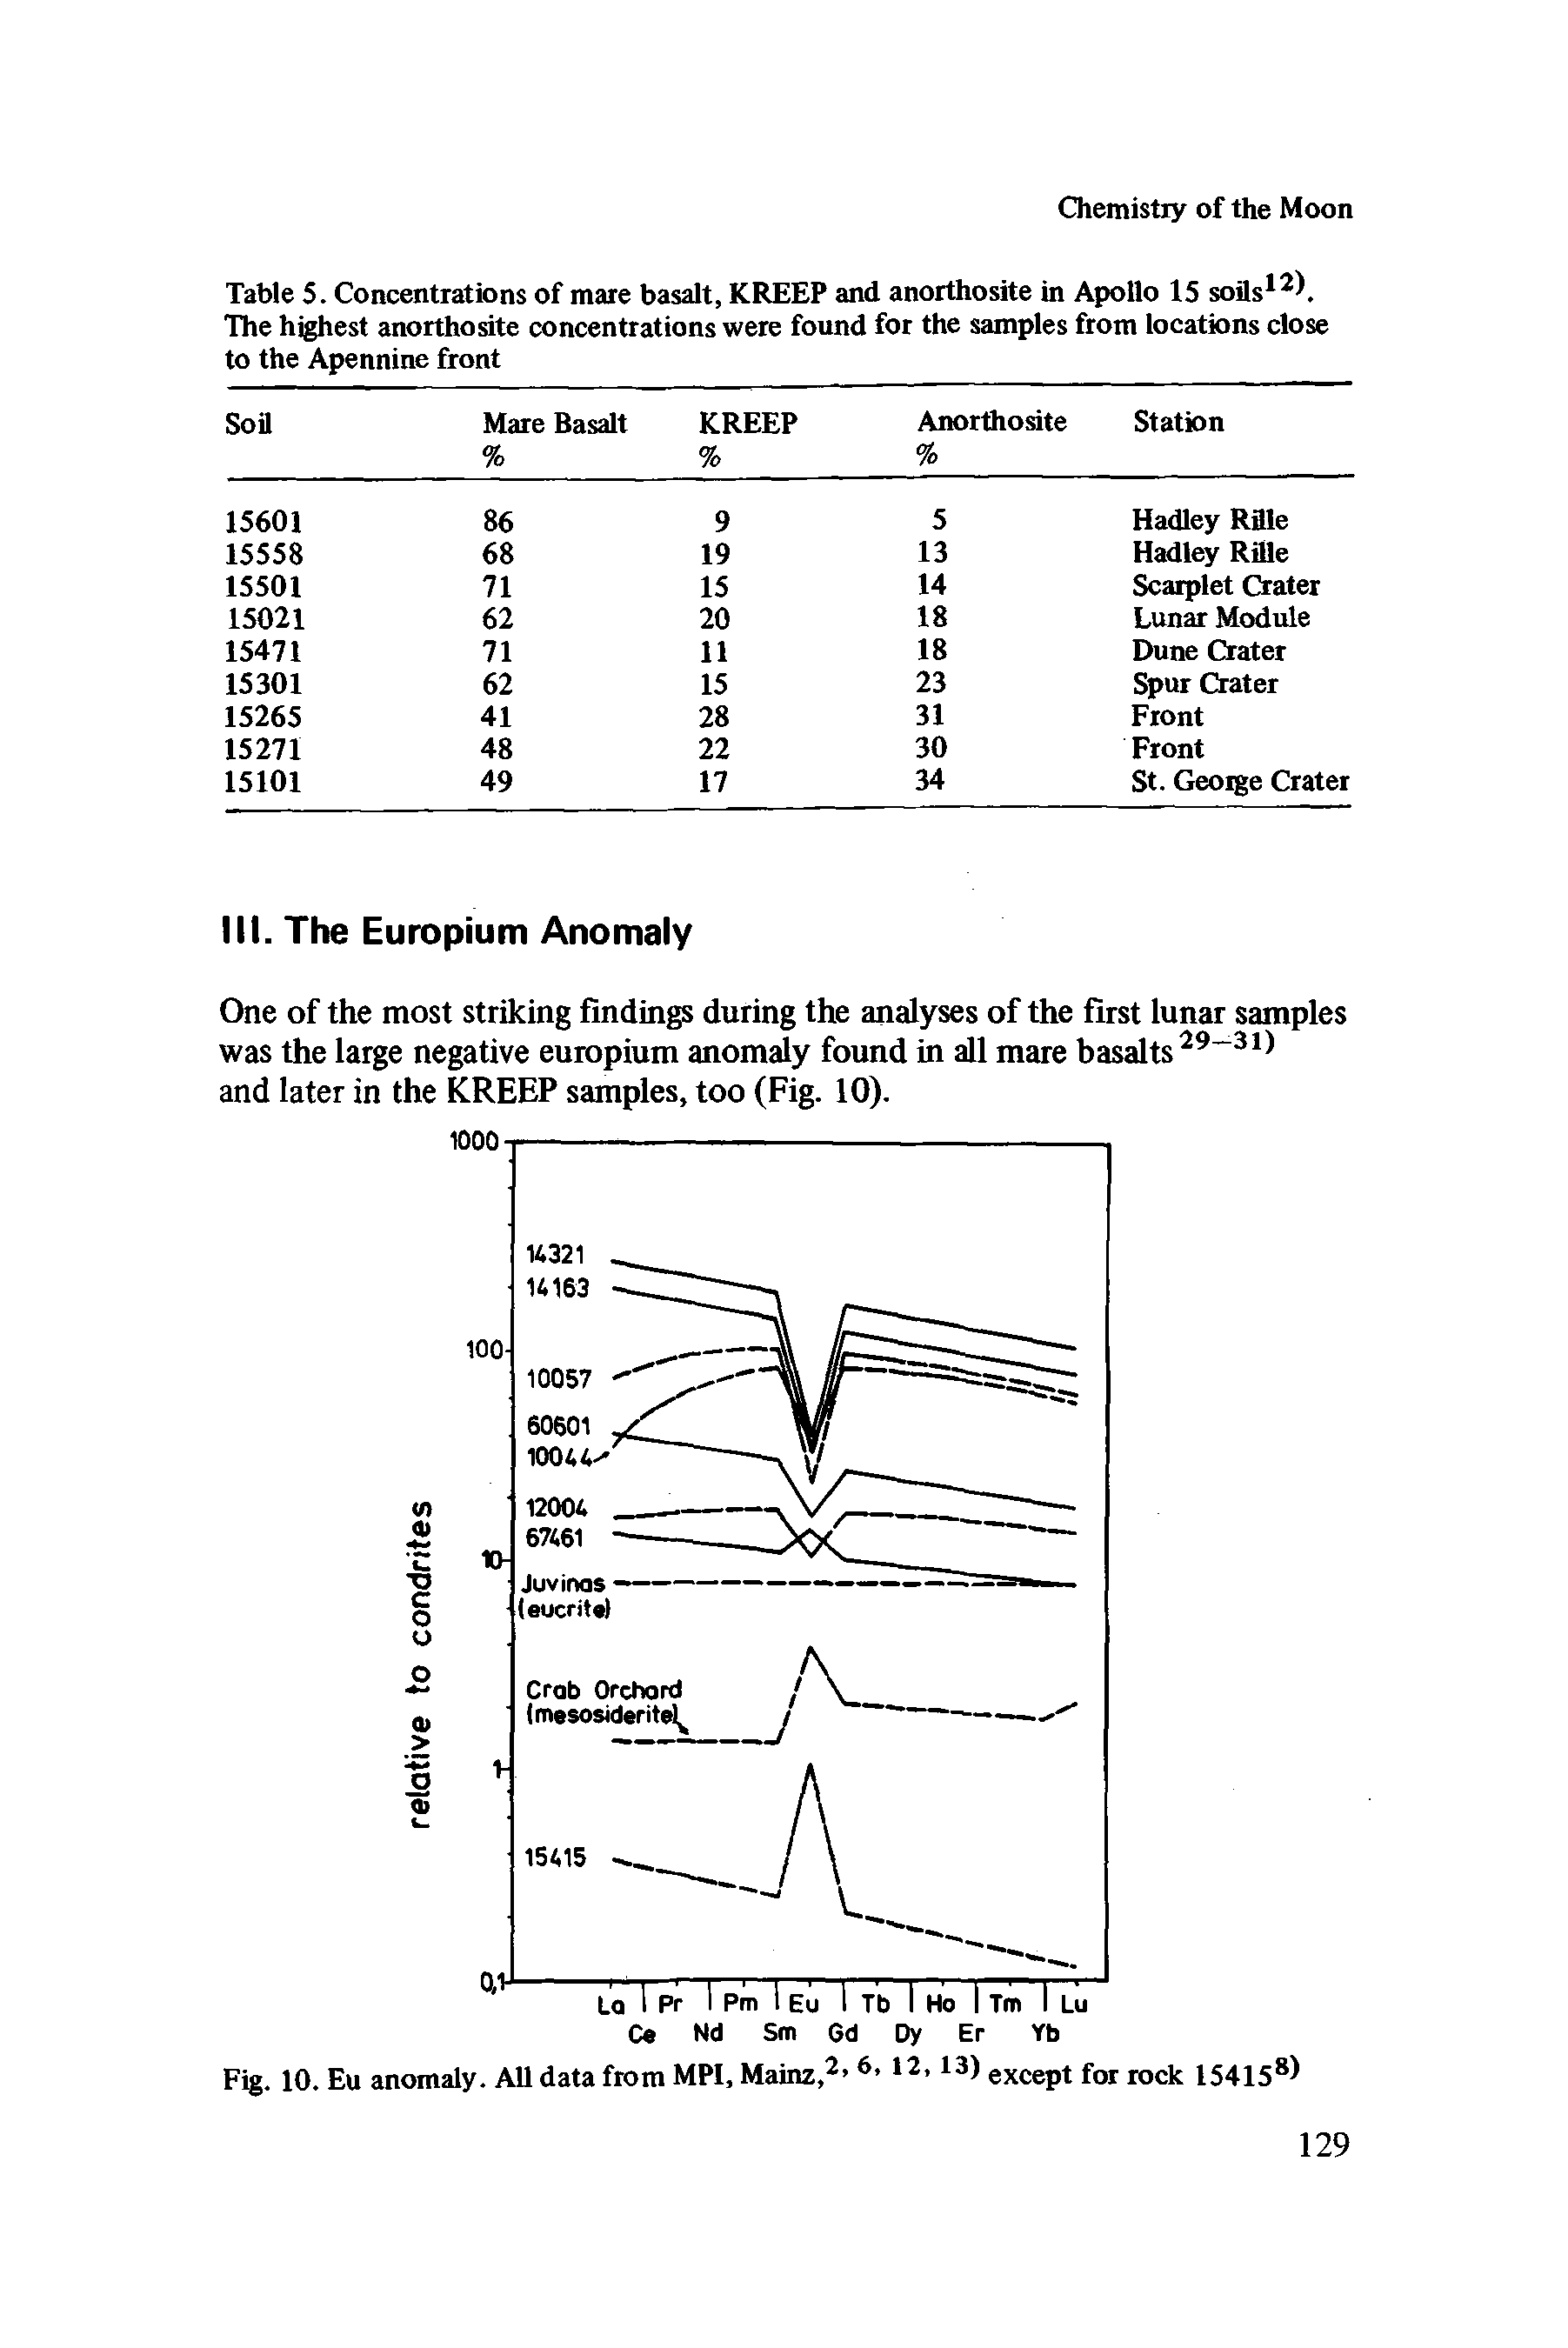 Table 5. Concentrations of mare basalt, KREEP and anorthosite in Apollo 15 soils12). The highest anorthosite concentrations were found for the samples from locations close to the Apennine front...